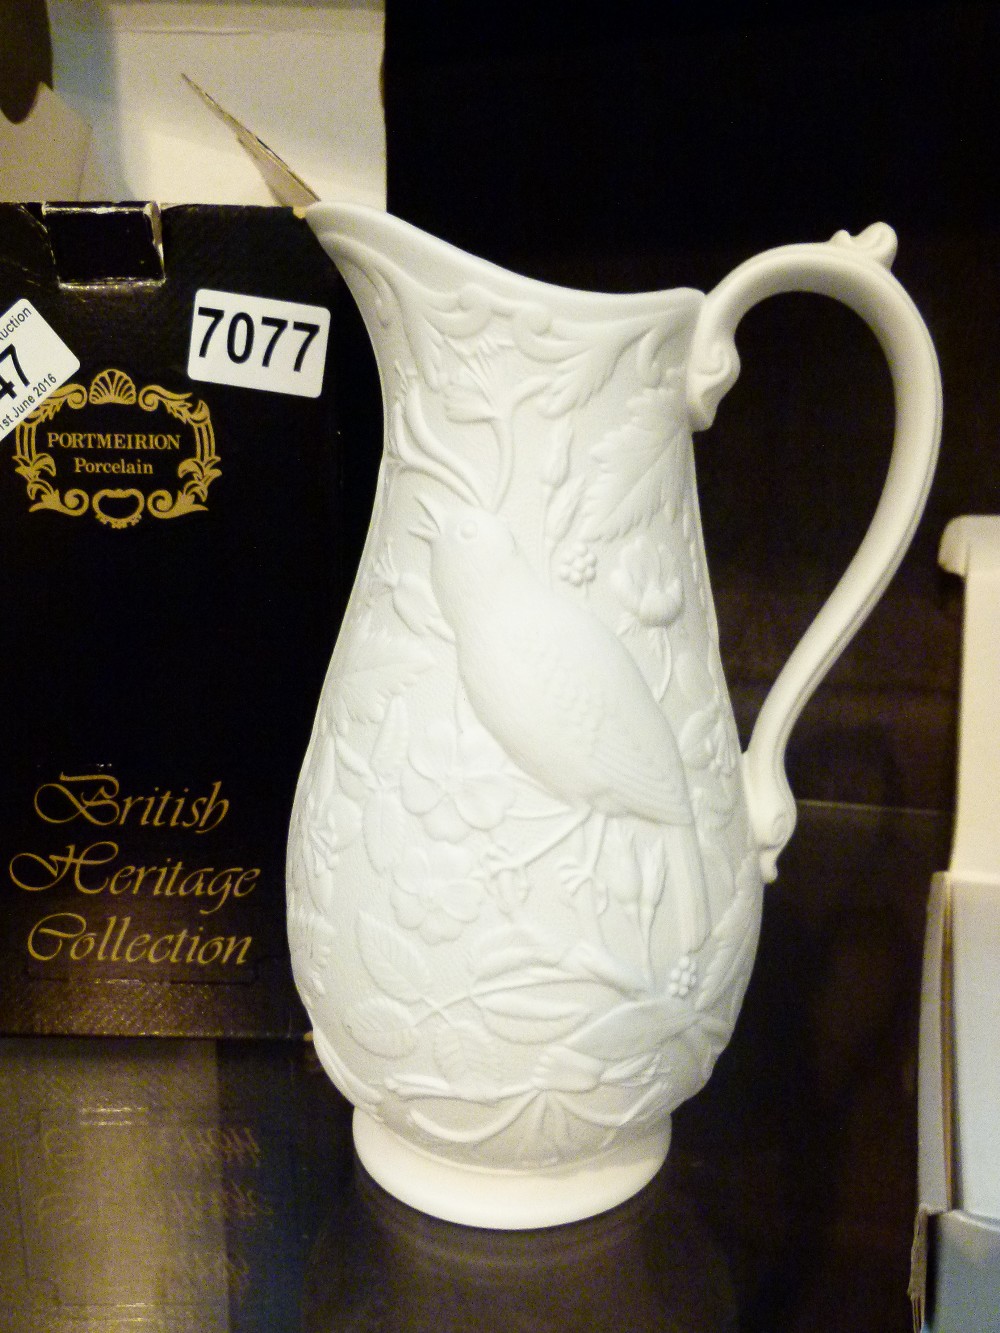 Portmeirion jug from the Heritage Collection with box